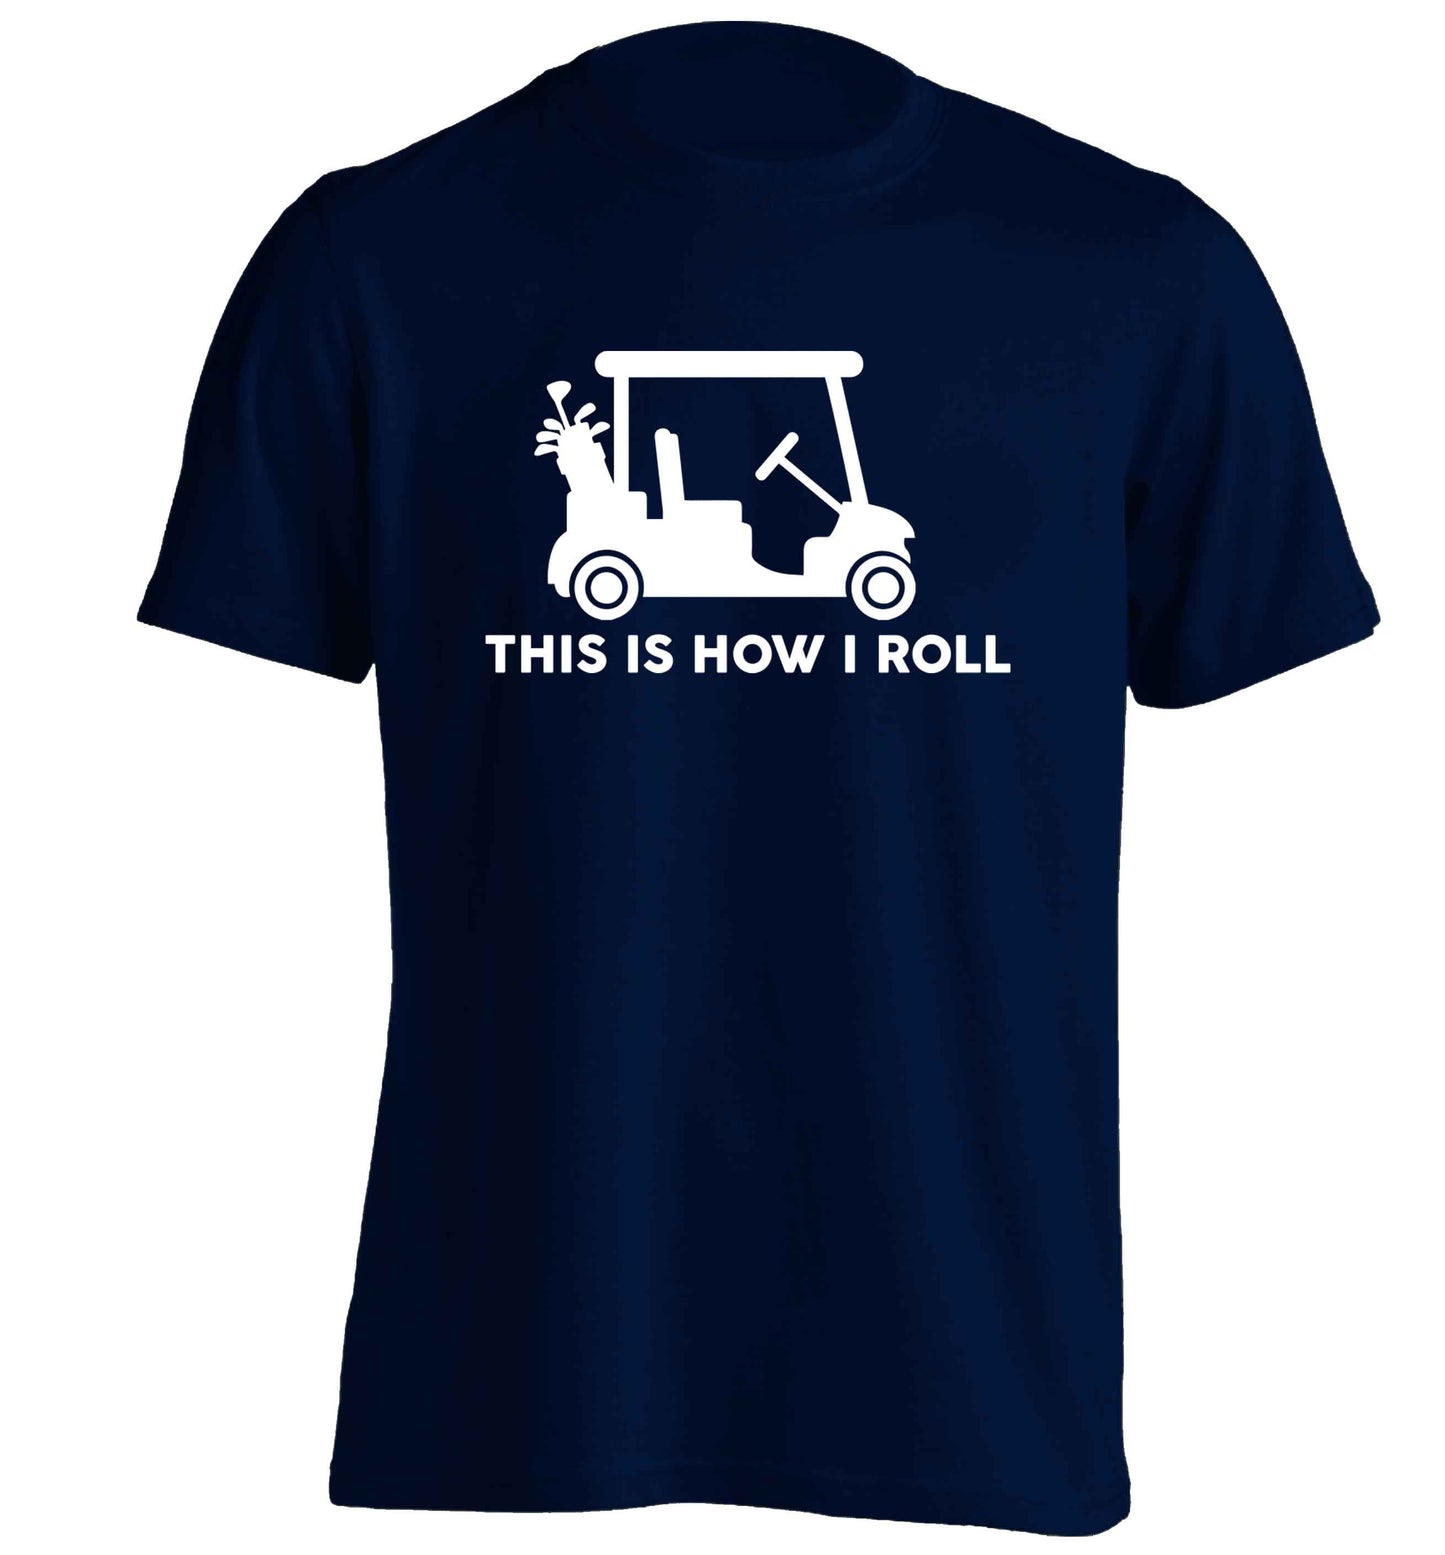 This is how I roll golf cart adults unisex navy Tshirt 2XL